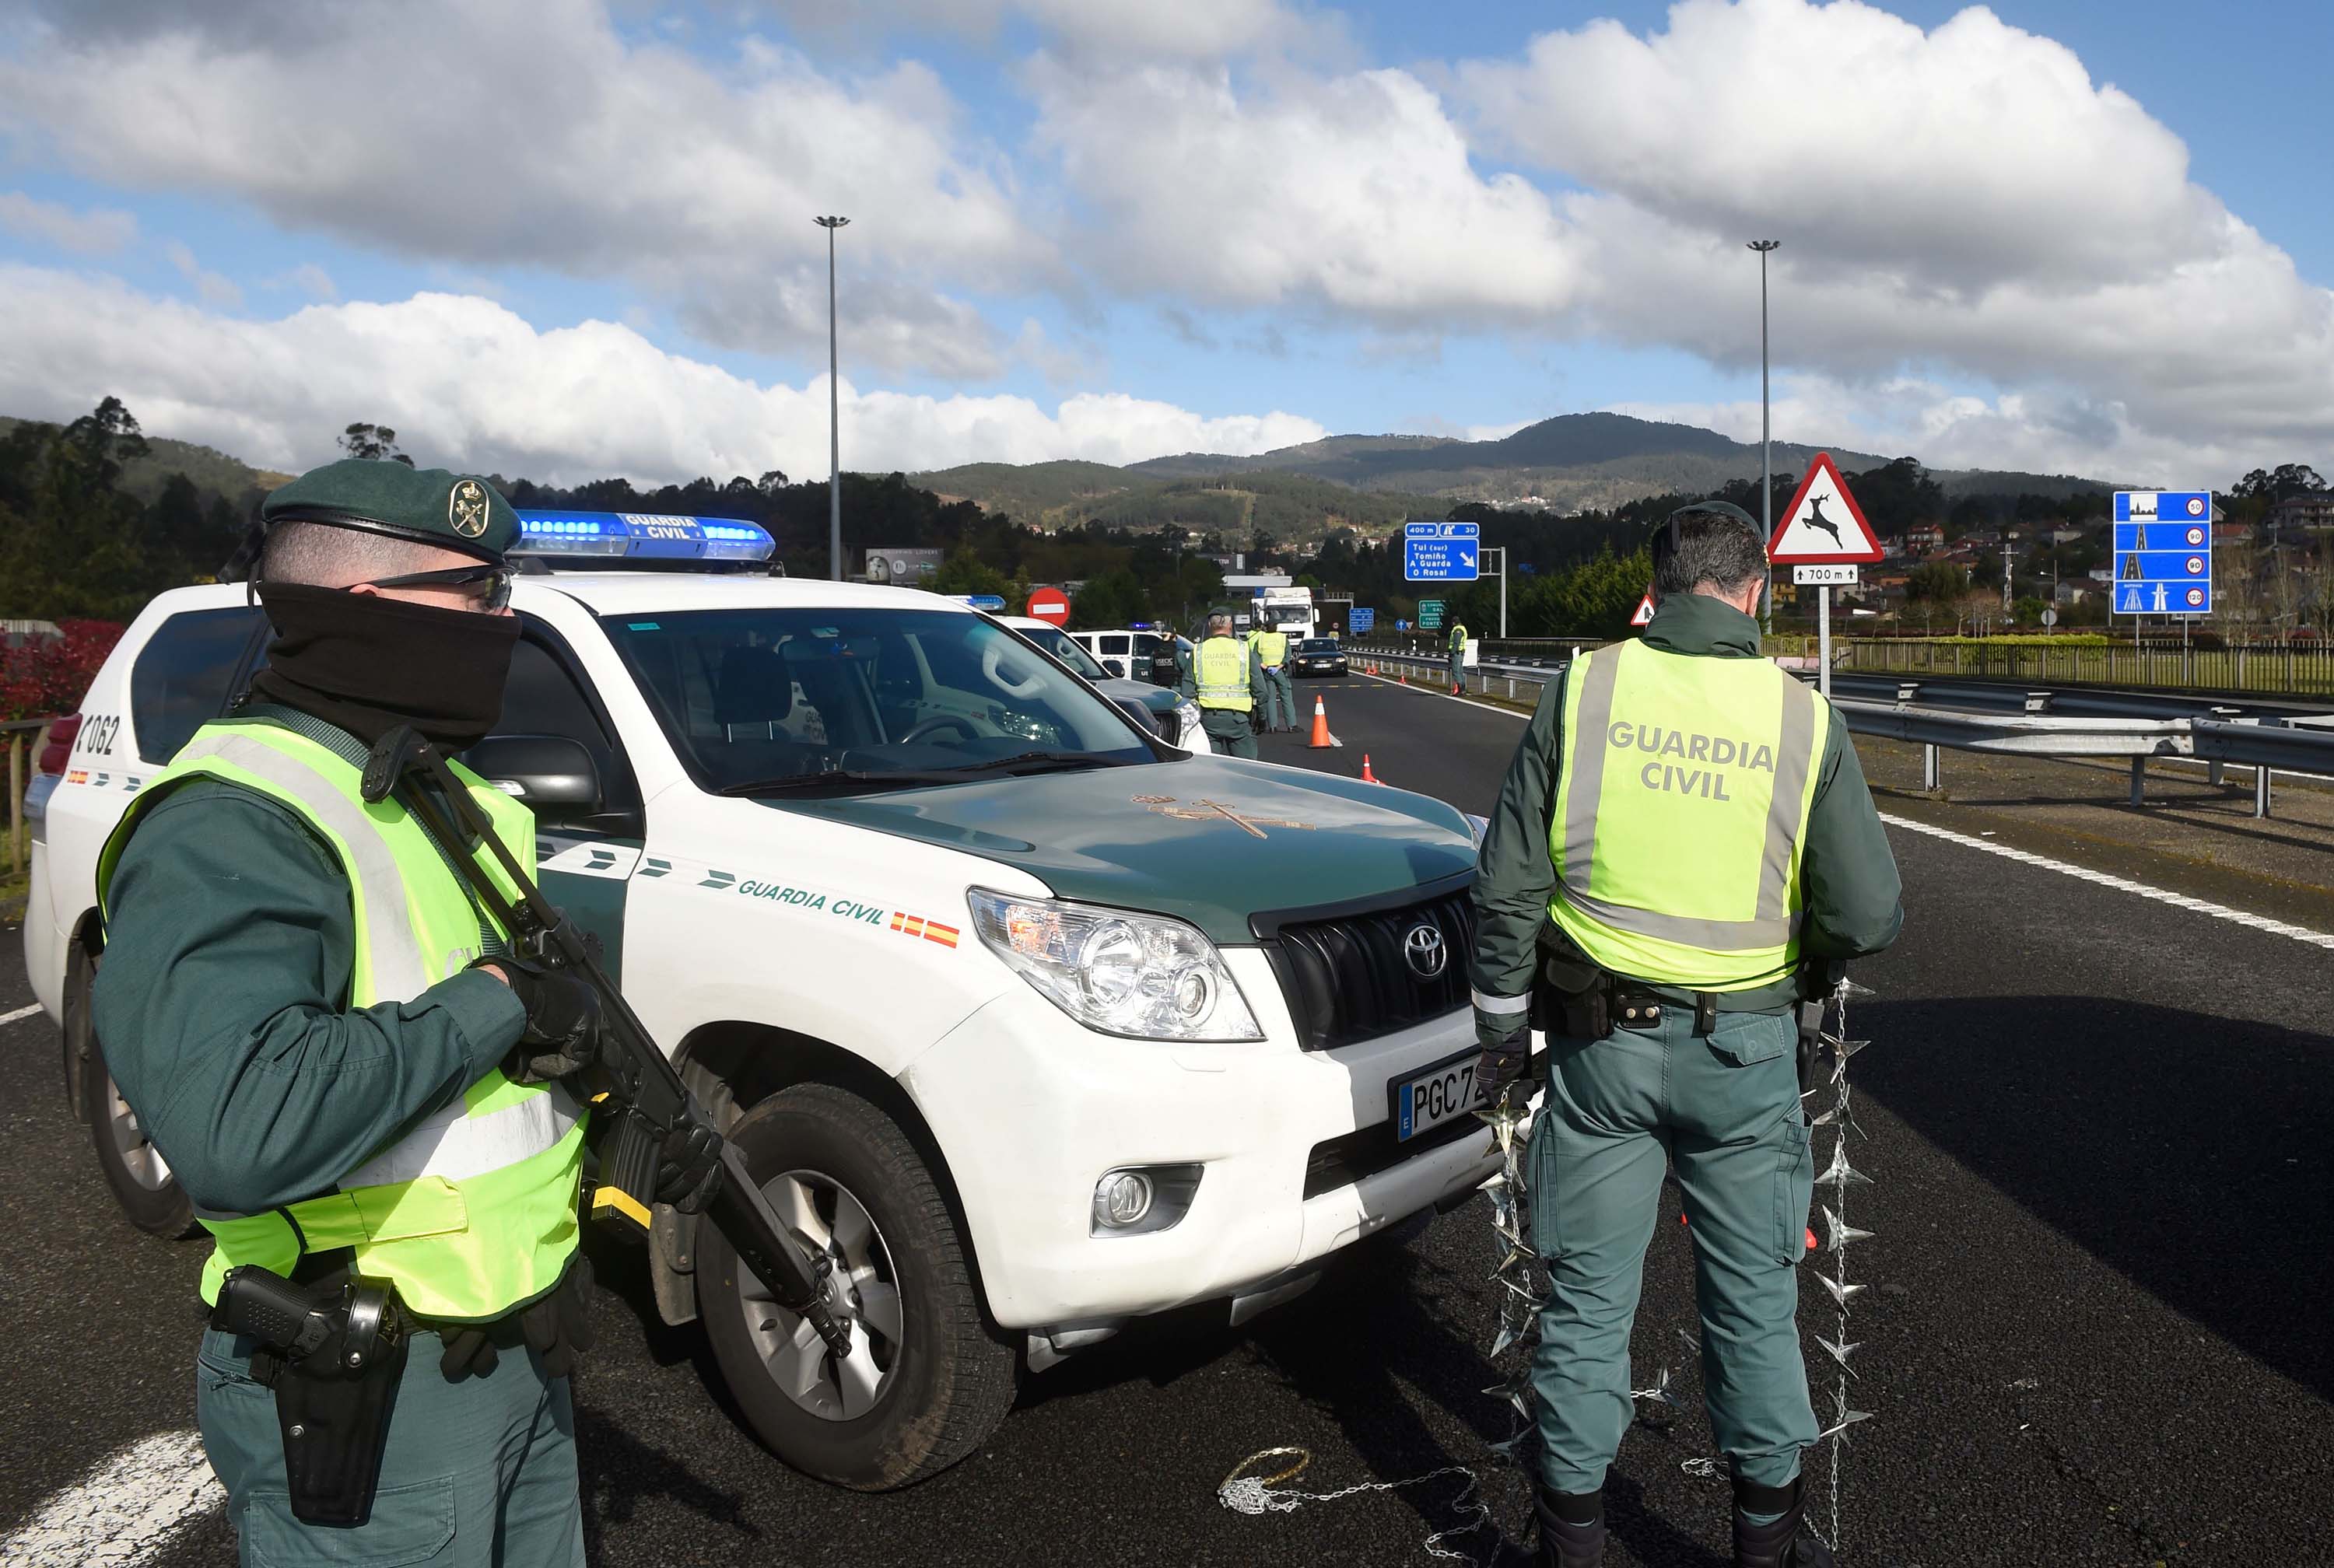 Spanish Civil Guard officers work at a checkpoint on the Spanish-Portuguese border between Tui and Valenca, on Monday.